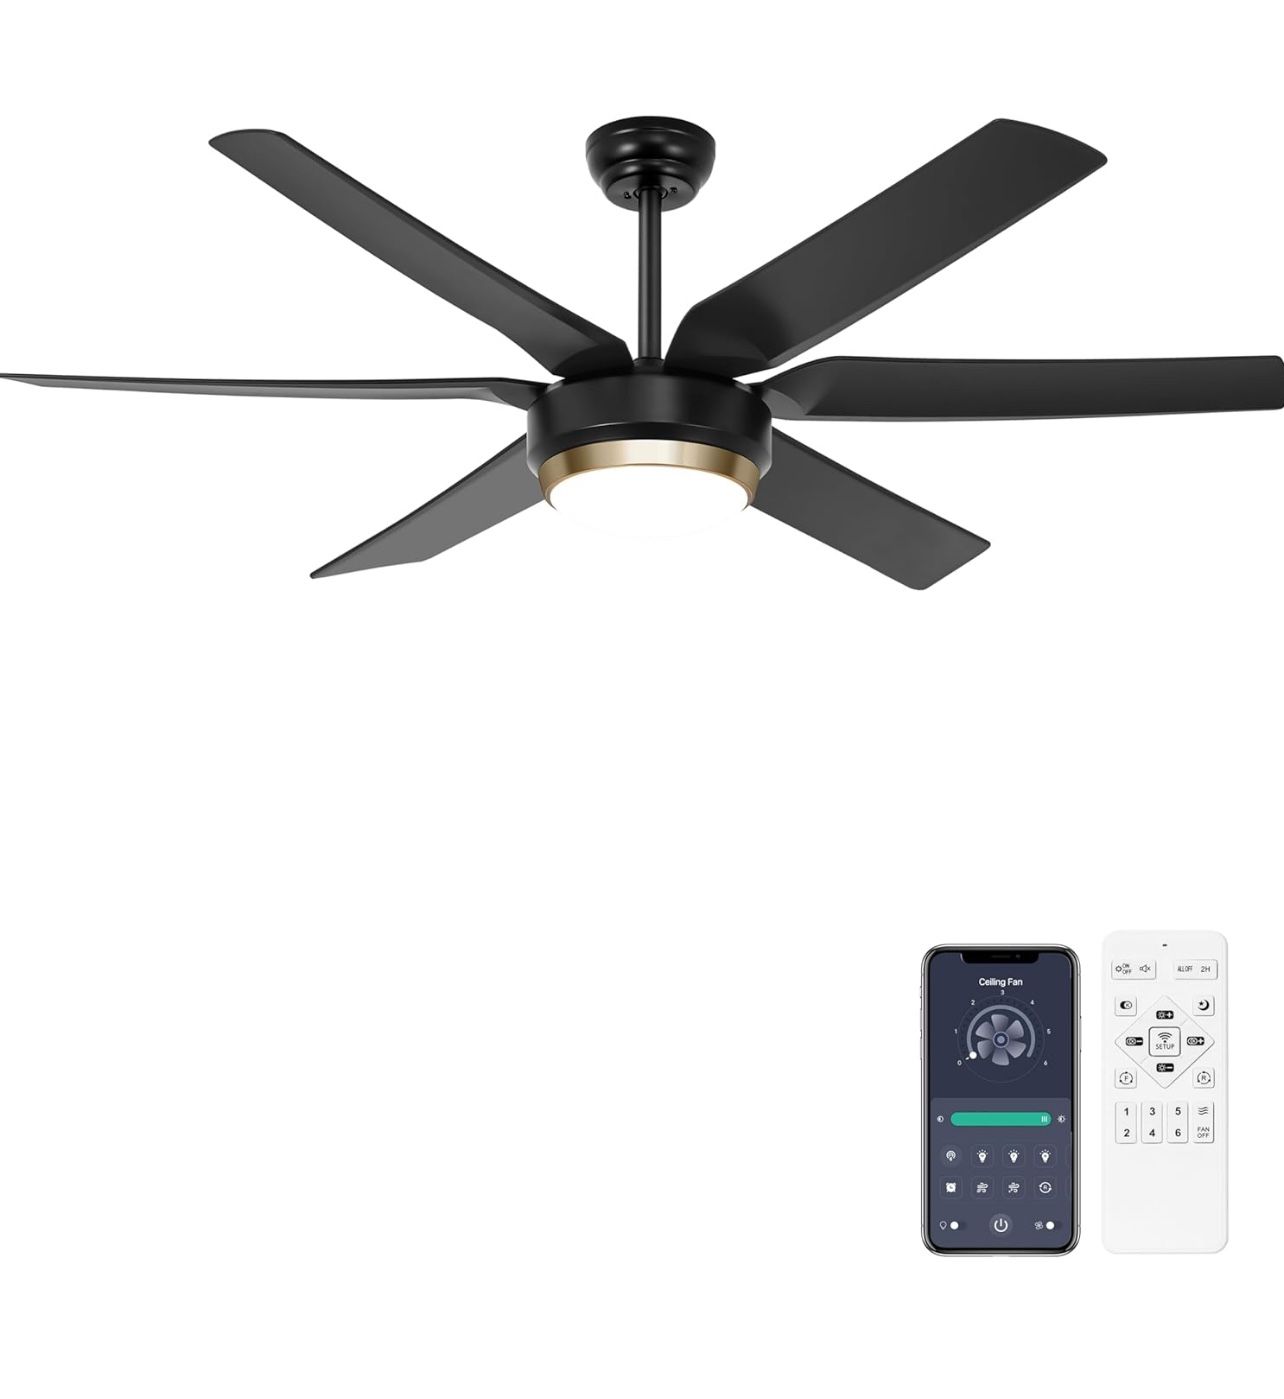 56'' Black Ceiling Fan with light, Remote/APP Control, Dimmable, indoor or outdoor